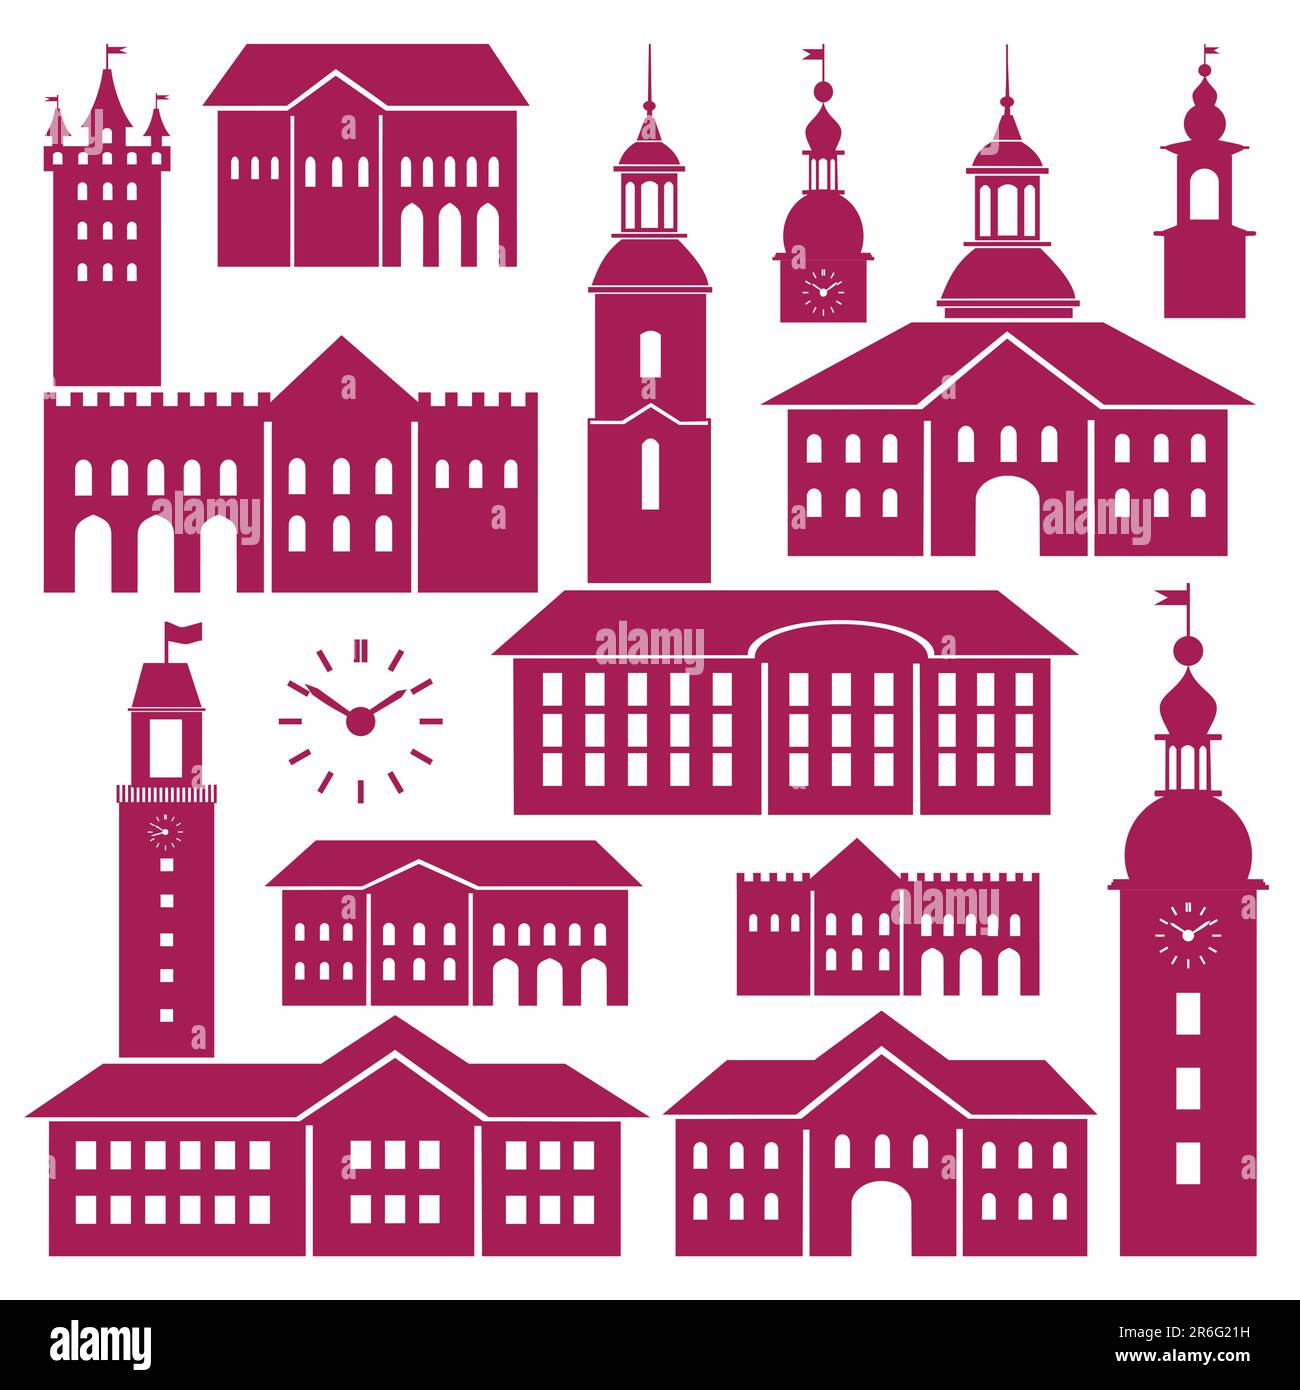 Set of vector old buildings elements for your design, scenes with old town hall and architectural details Stock Vector